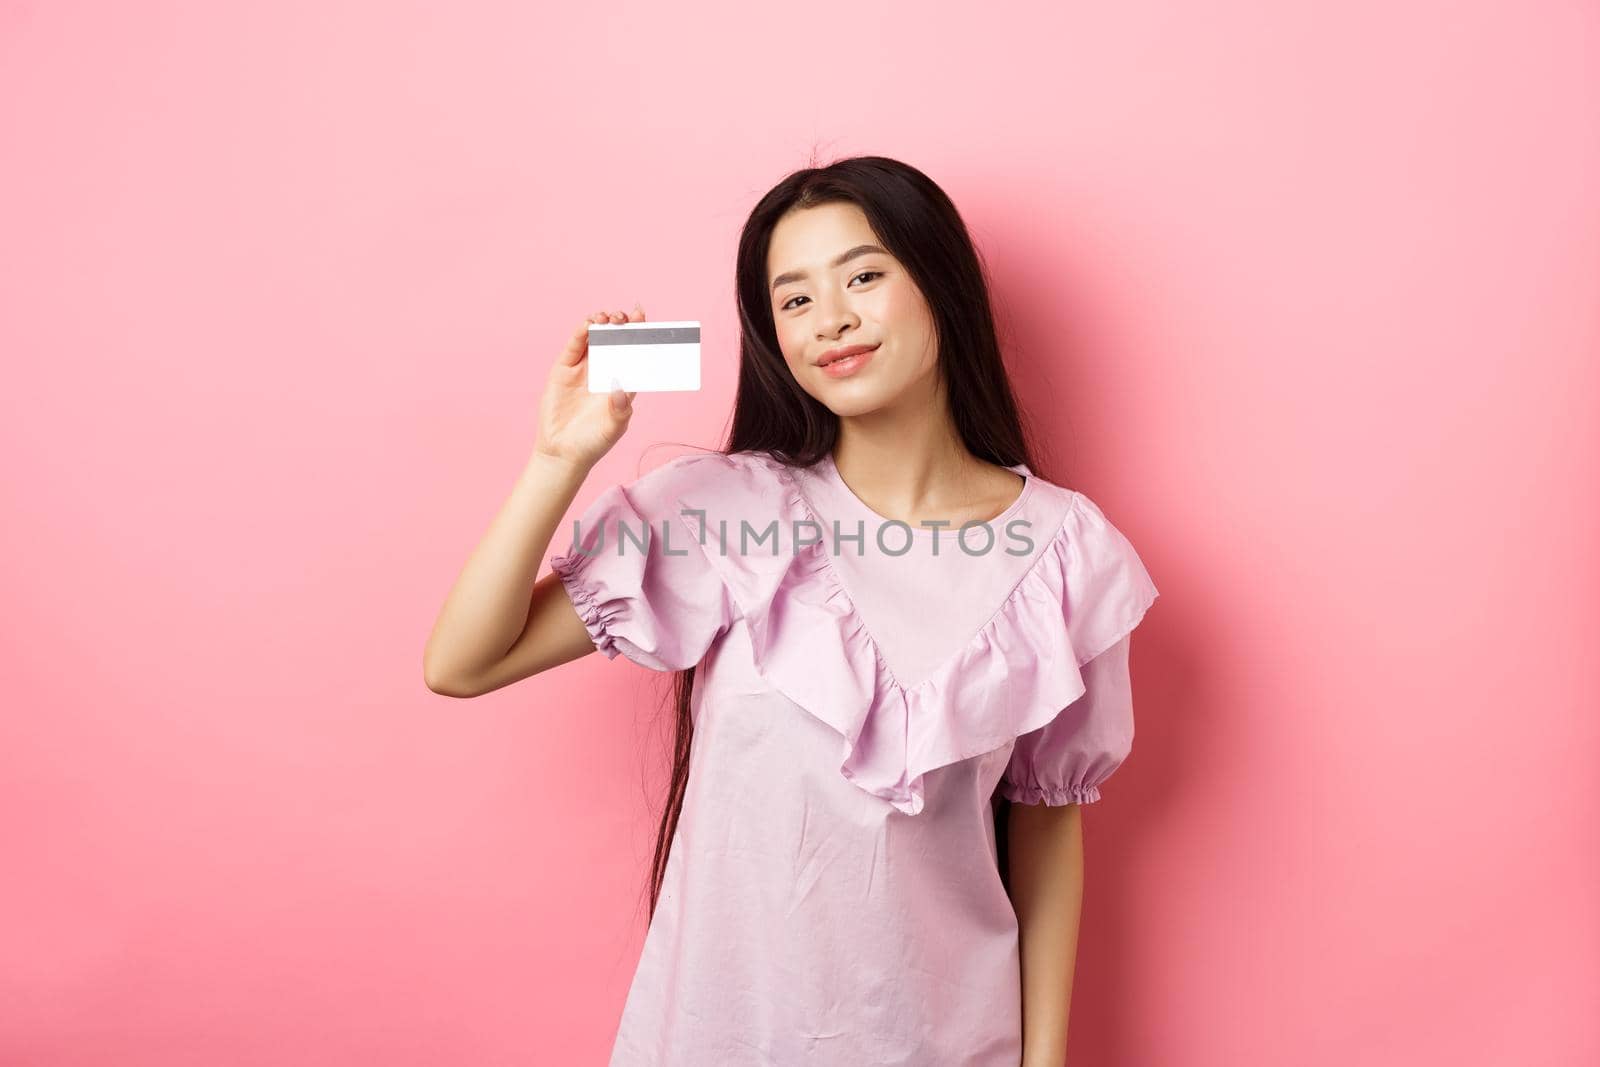 Shopping. Young korean girl in dress showing credit card, smiling satisfied at camera, standing on pink background.